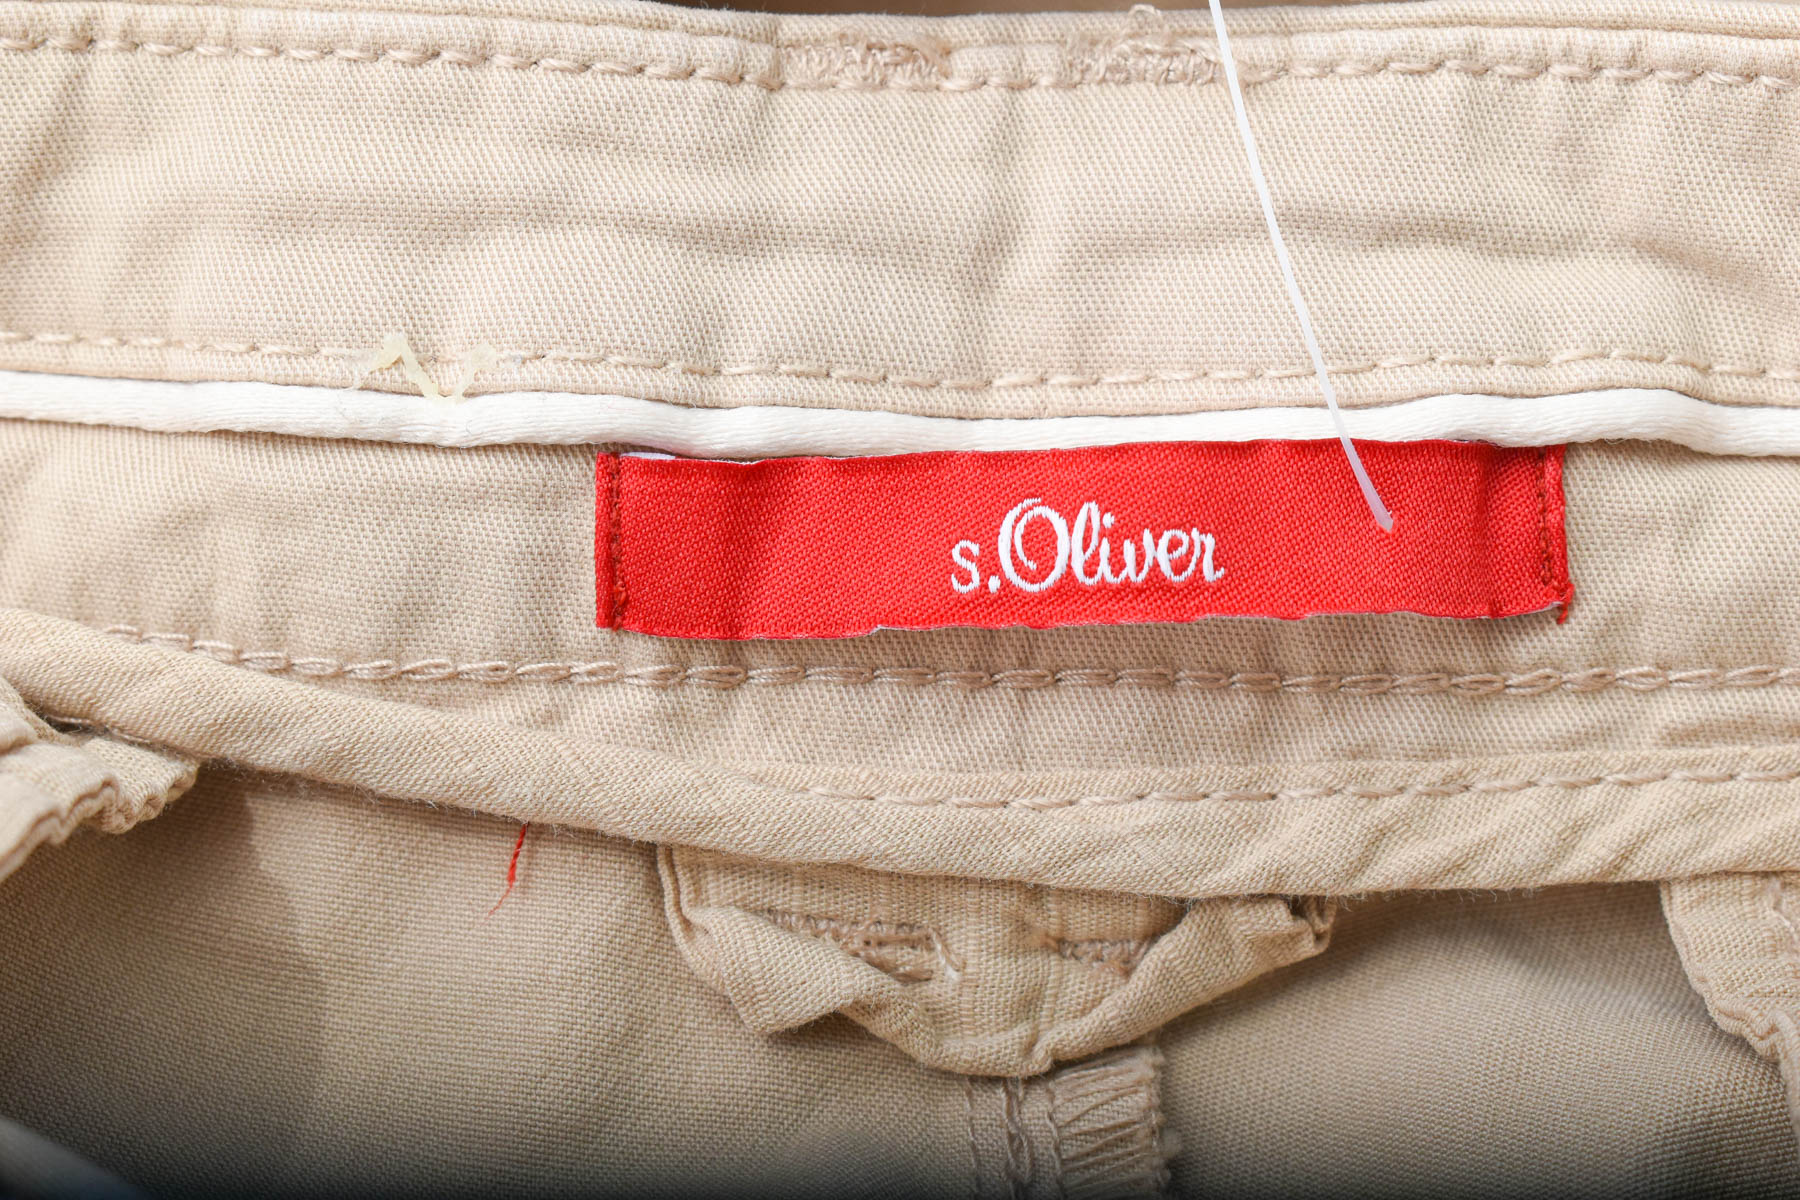 Women's trousers - S.Oliver - 2